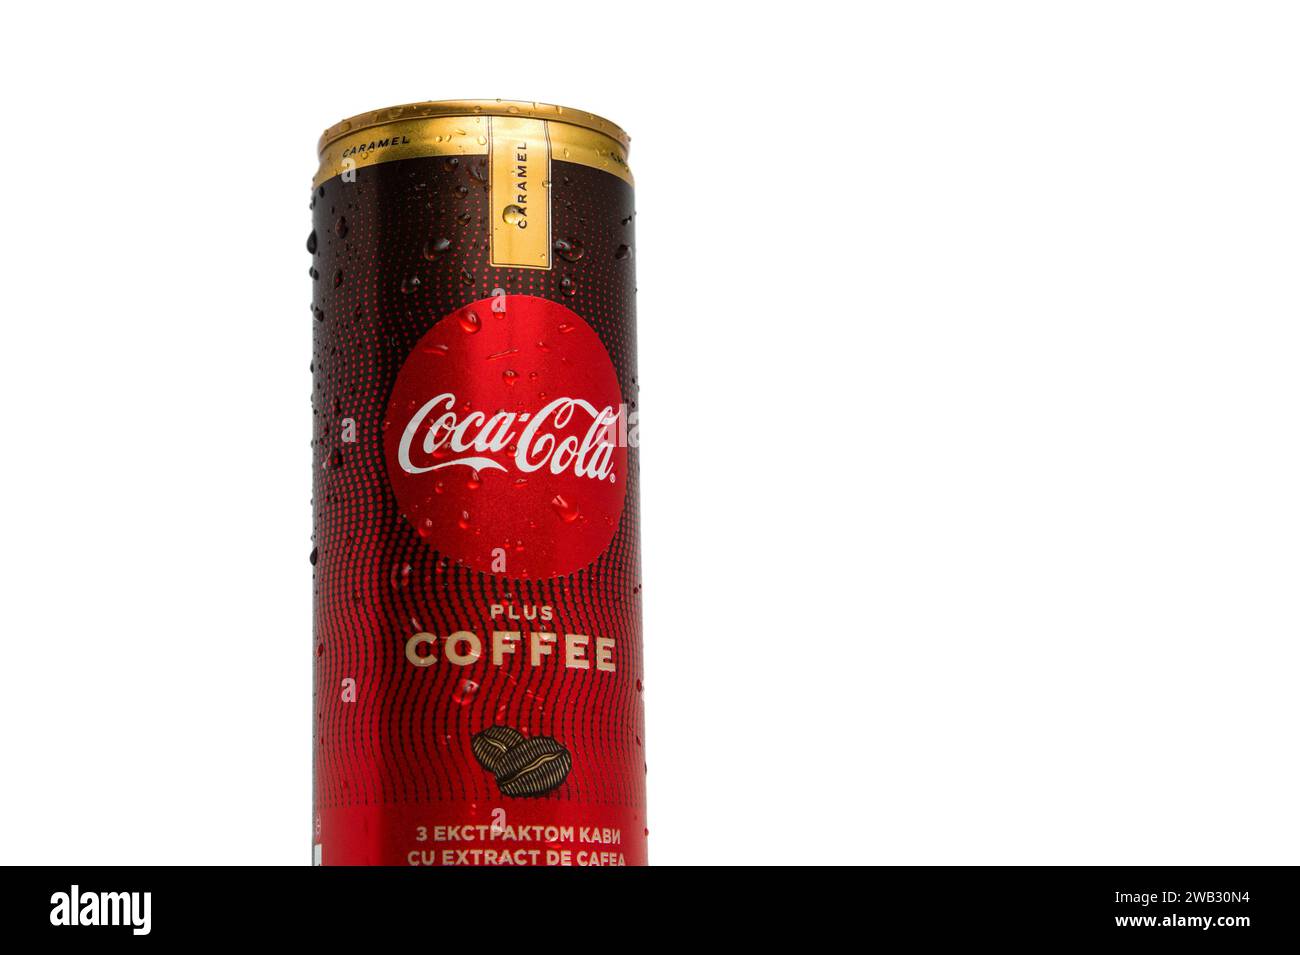 A can of Coca-Cola Plus Coffee Caramel with drops of water on a white background Stock Photo